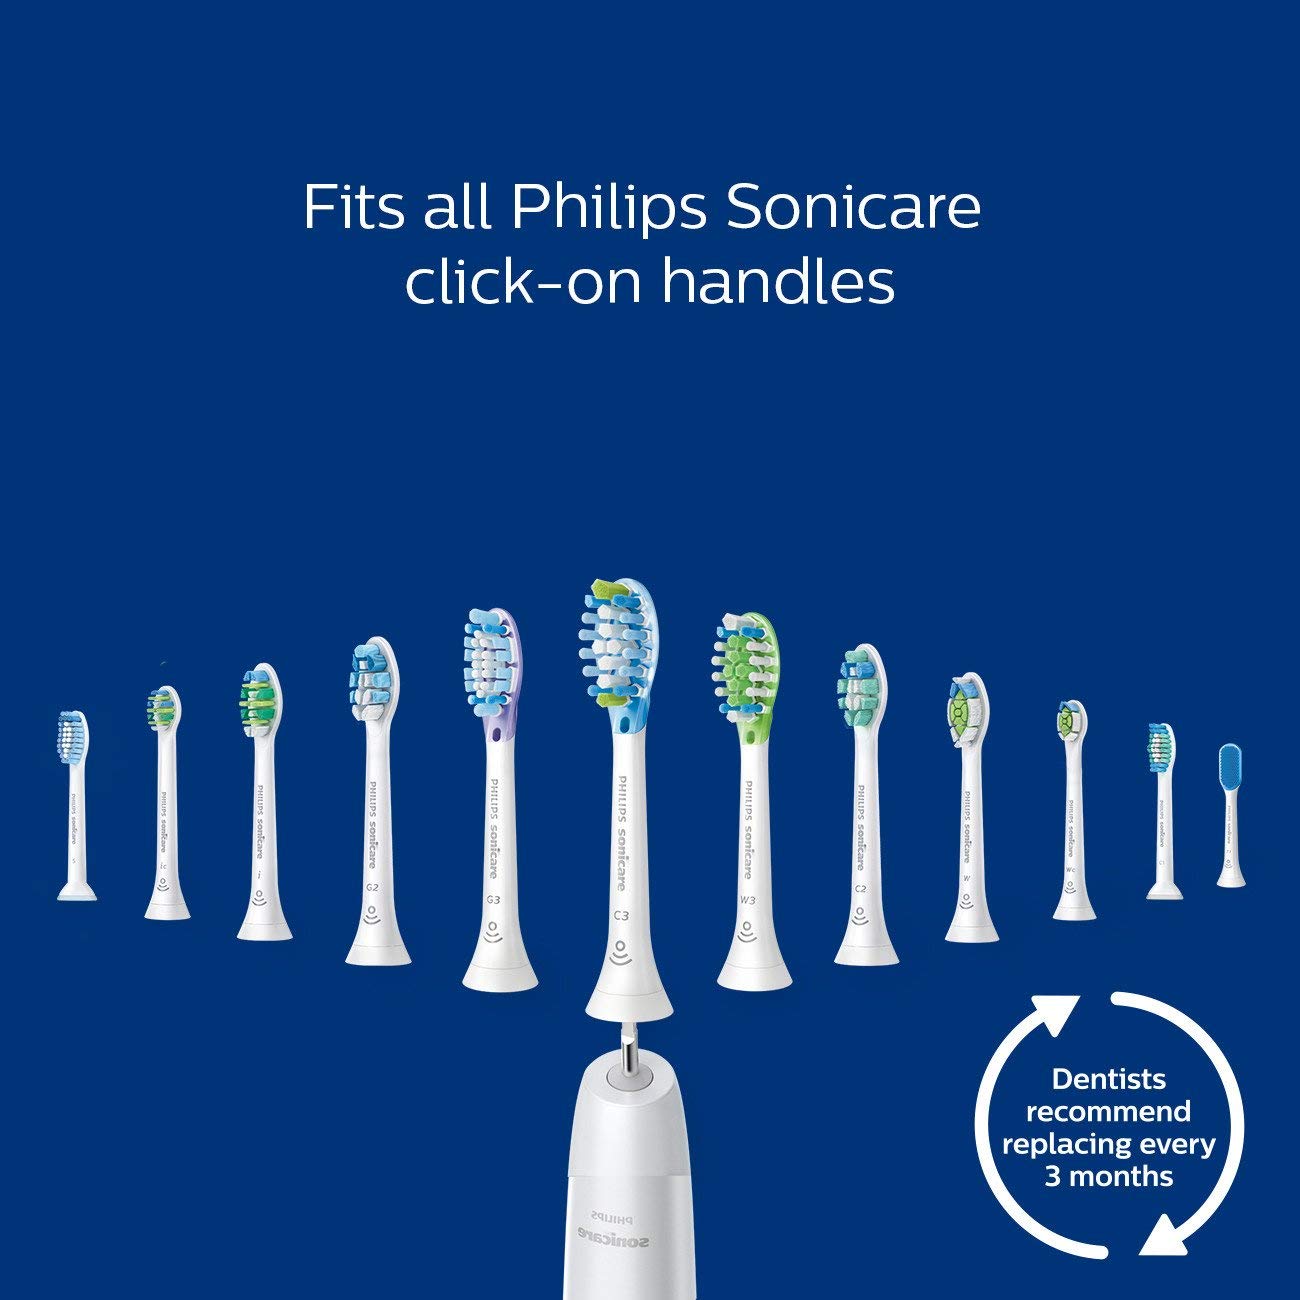 Fits all Philips Sonicare click-on handles